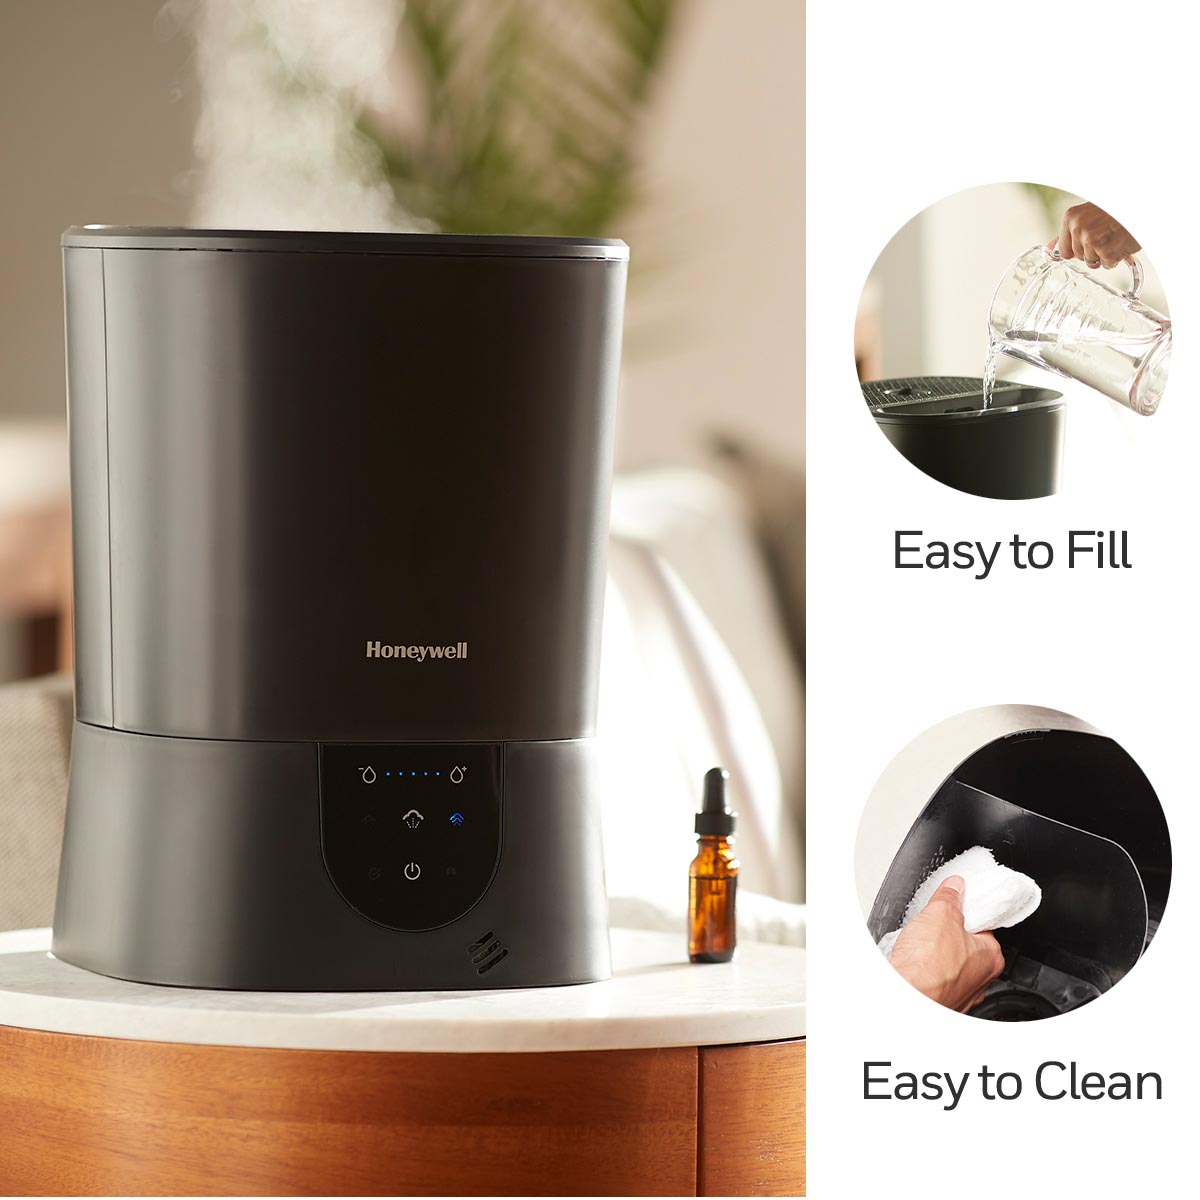 https://www.honeywellconsumerstore.com/store/images/products/large_images/hwm445b-honeywell-easy-to-care-warm-mist-humidifier-4.jpg